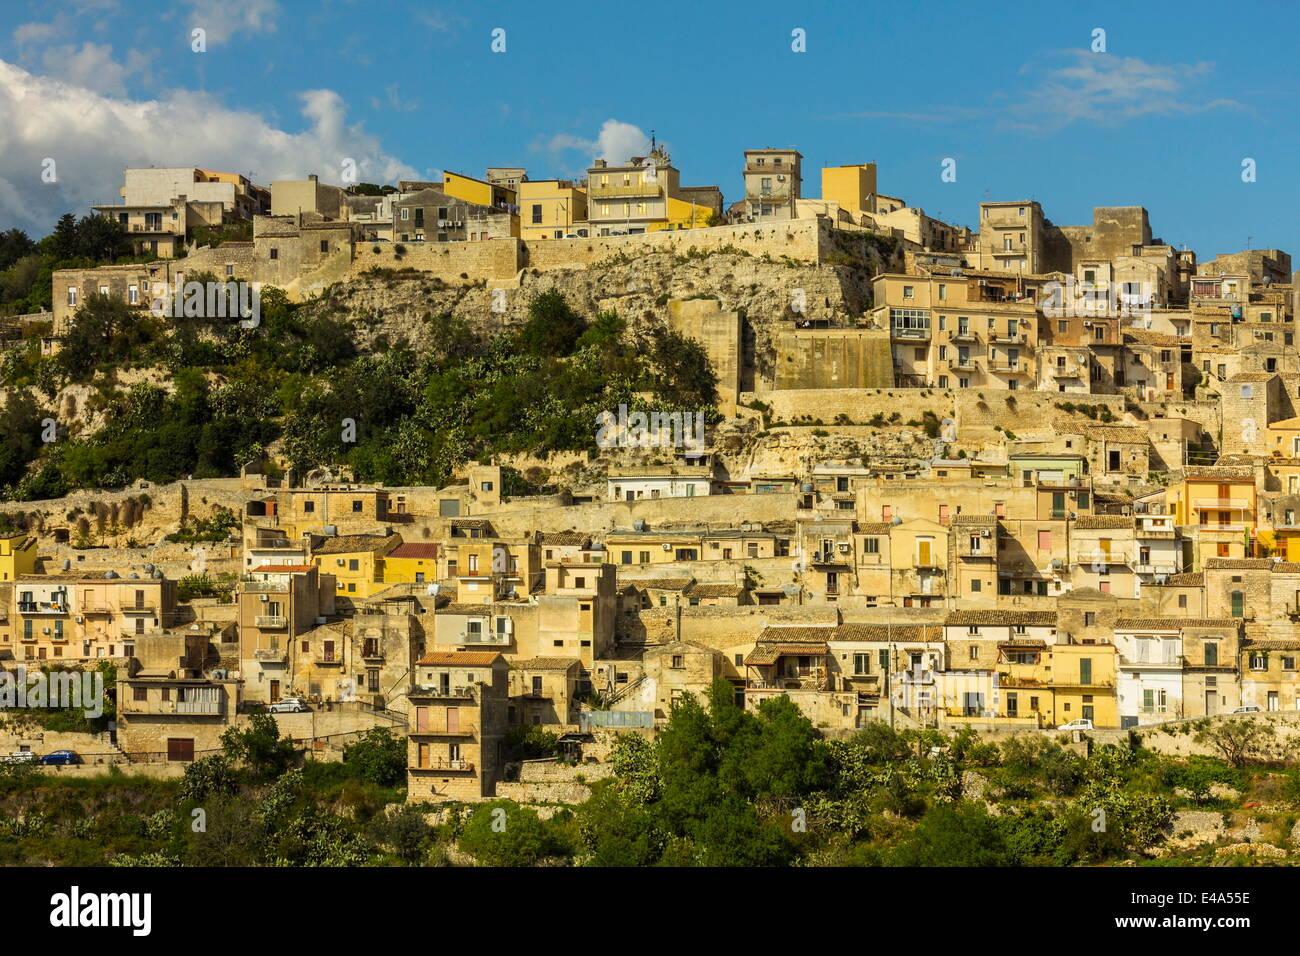 Buildings in steep gorge at Modica, a town famed for its Baroque architecture, UNESCO, Modica, Ragusa Province, Sicily, Italy Stock Photo